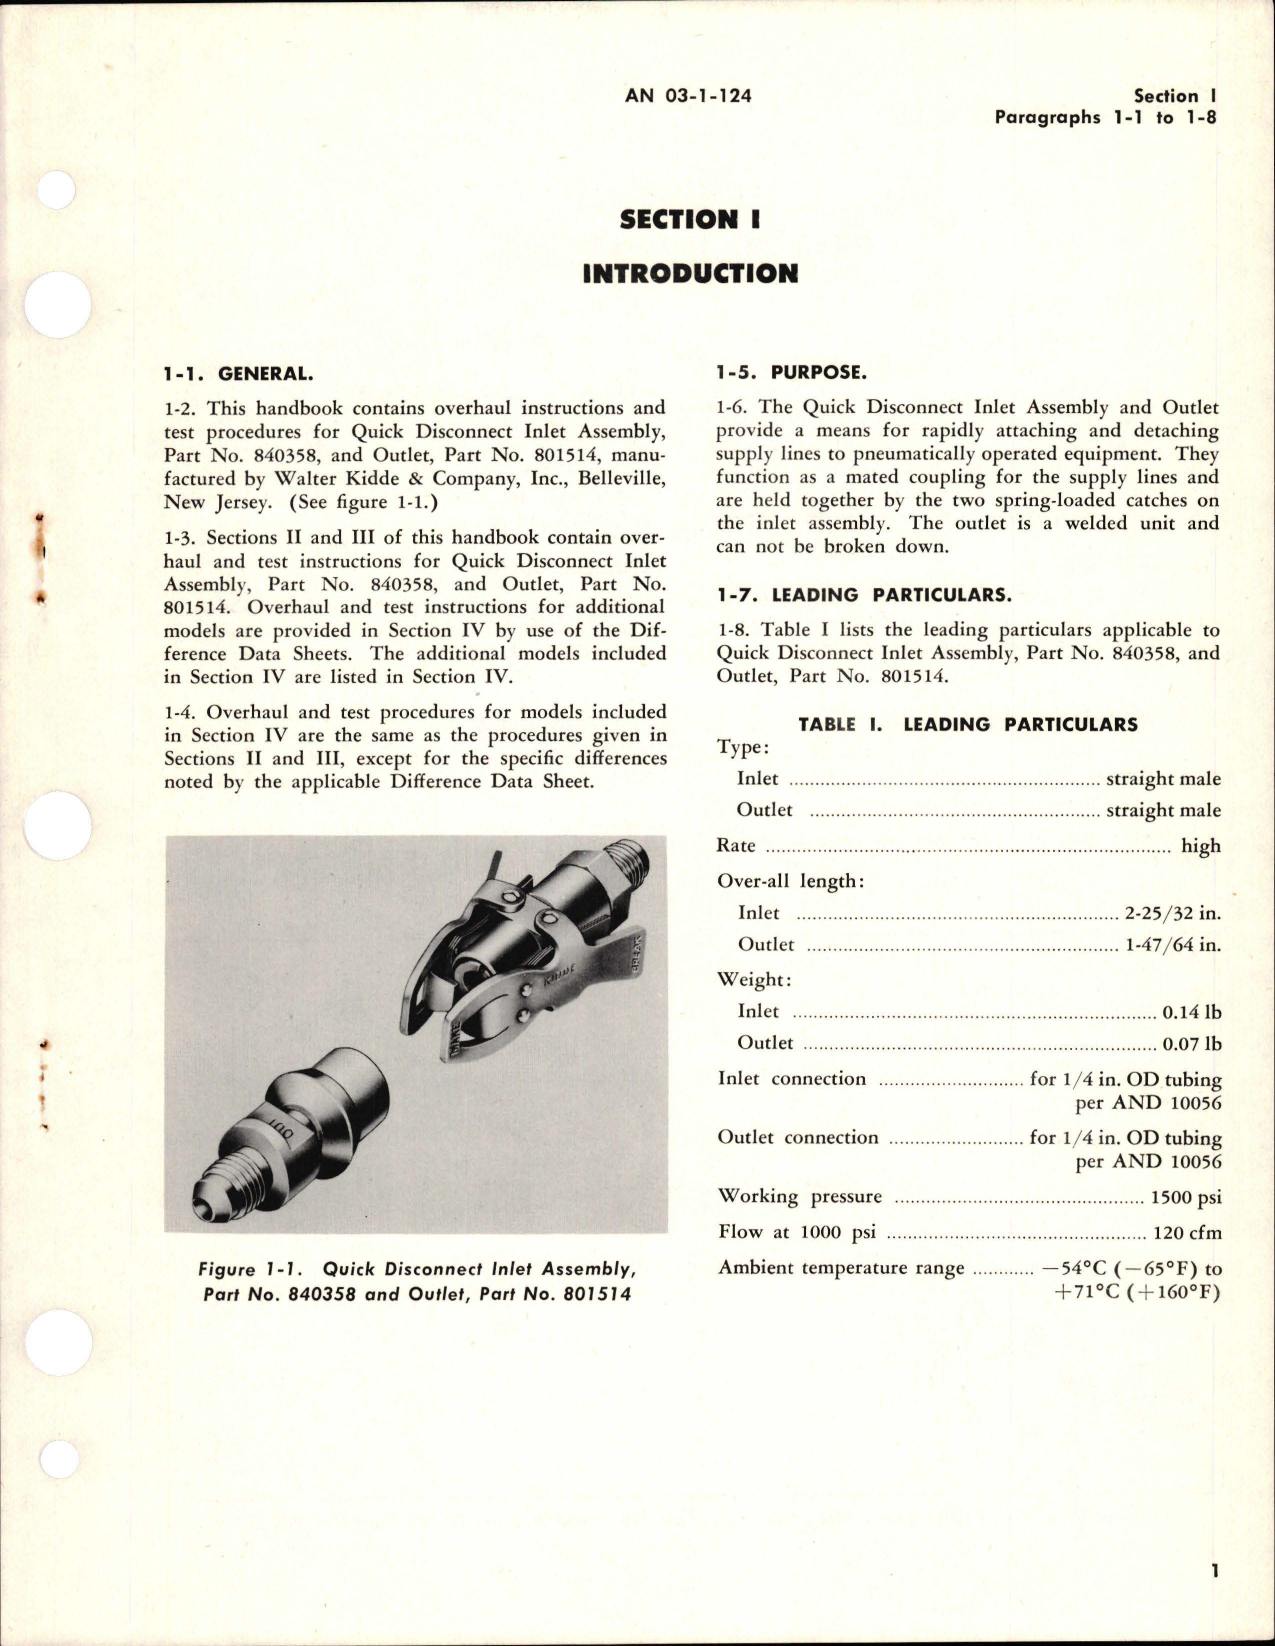 Sample page 5 from AirCorps Library document: Overhaul Instructions for Quick Disconnect Inlet Assembly and Outlet